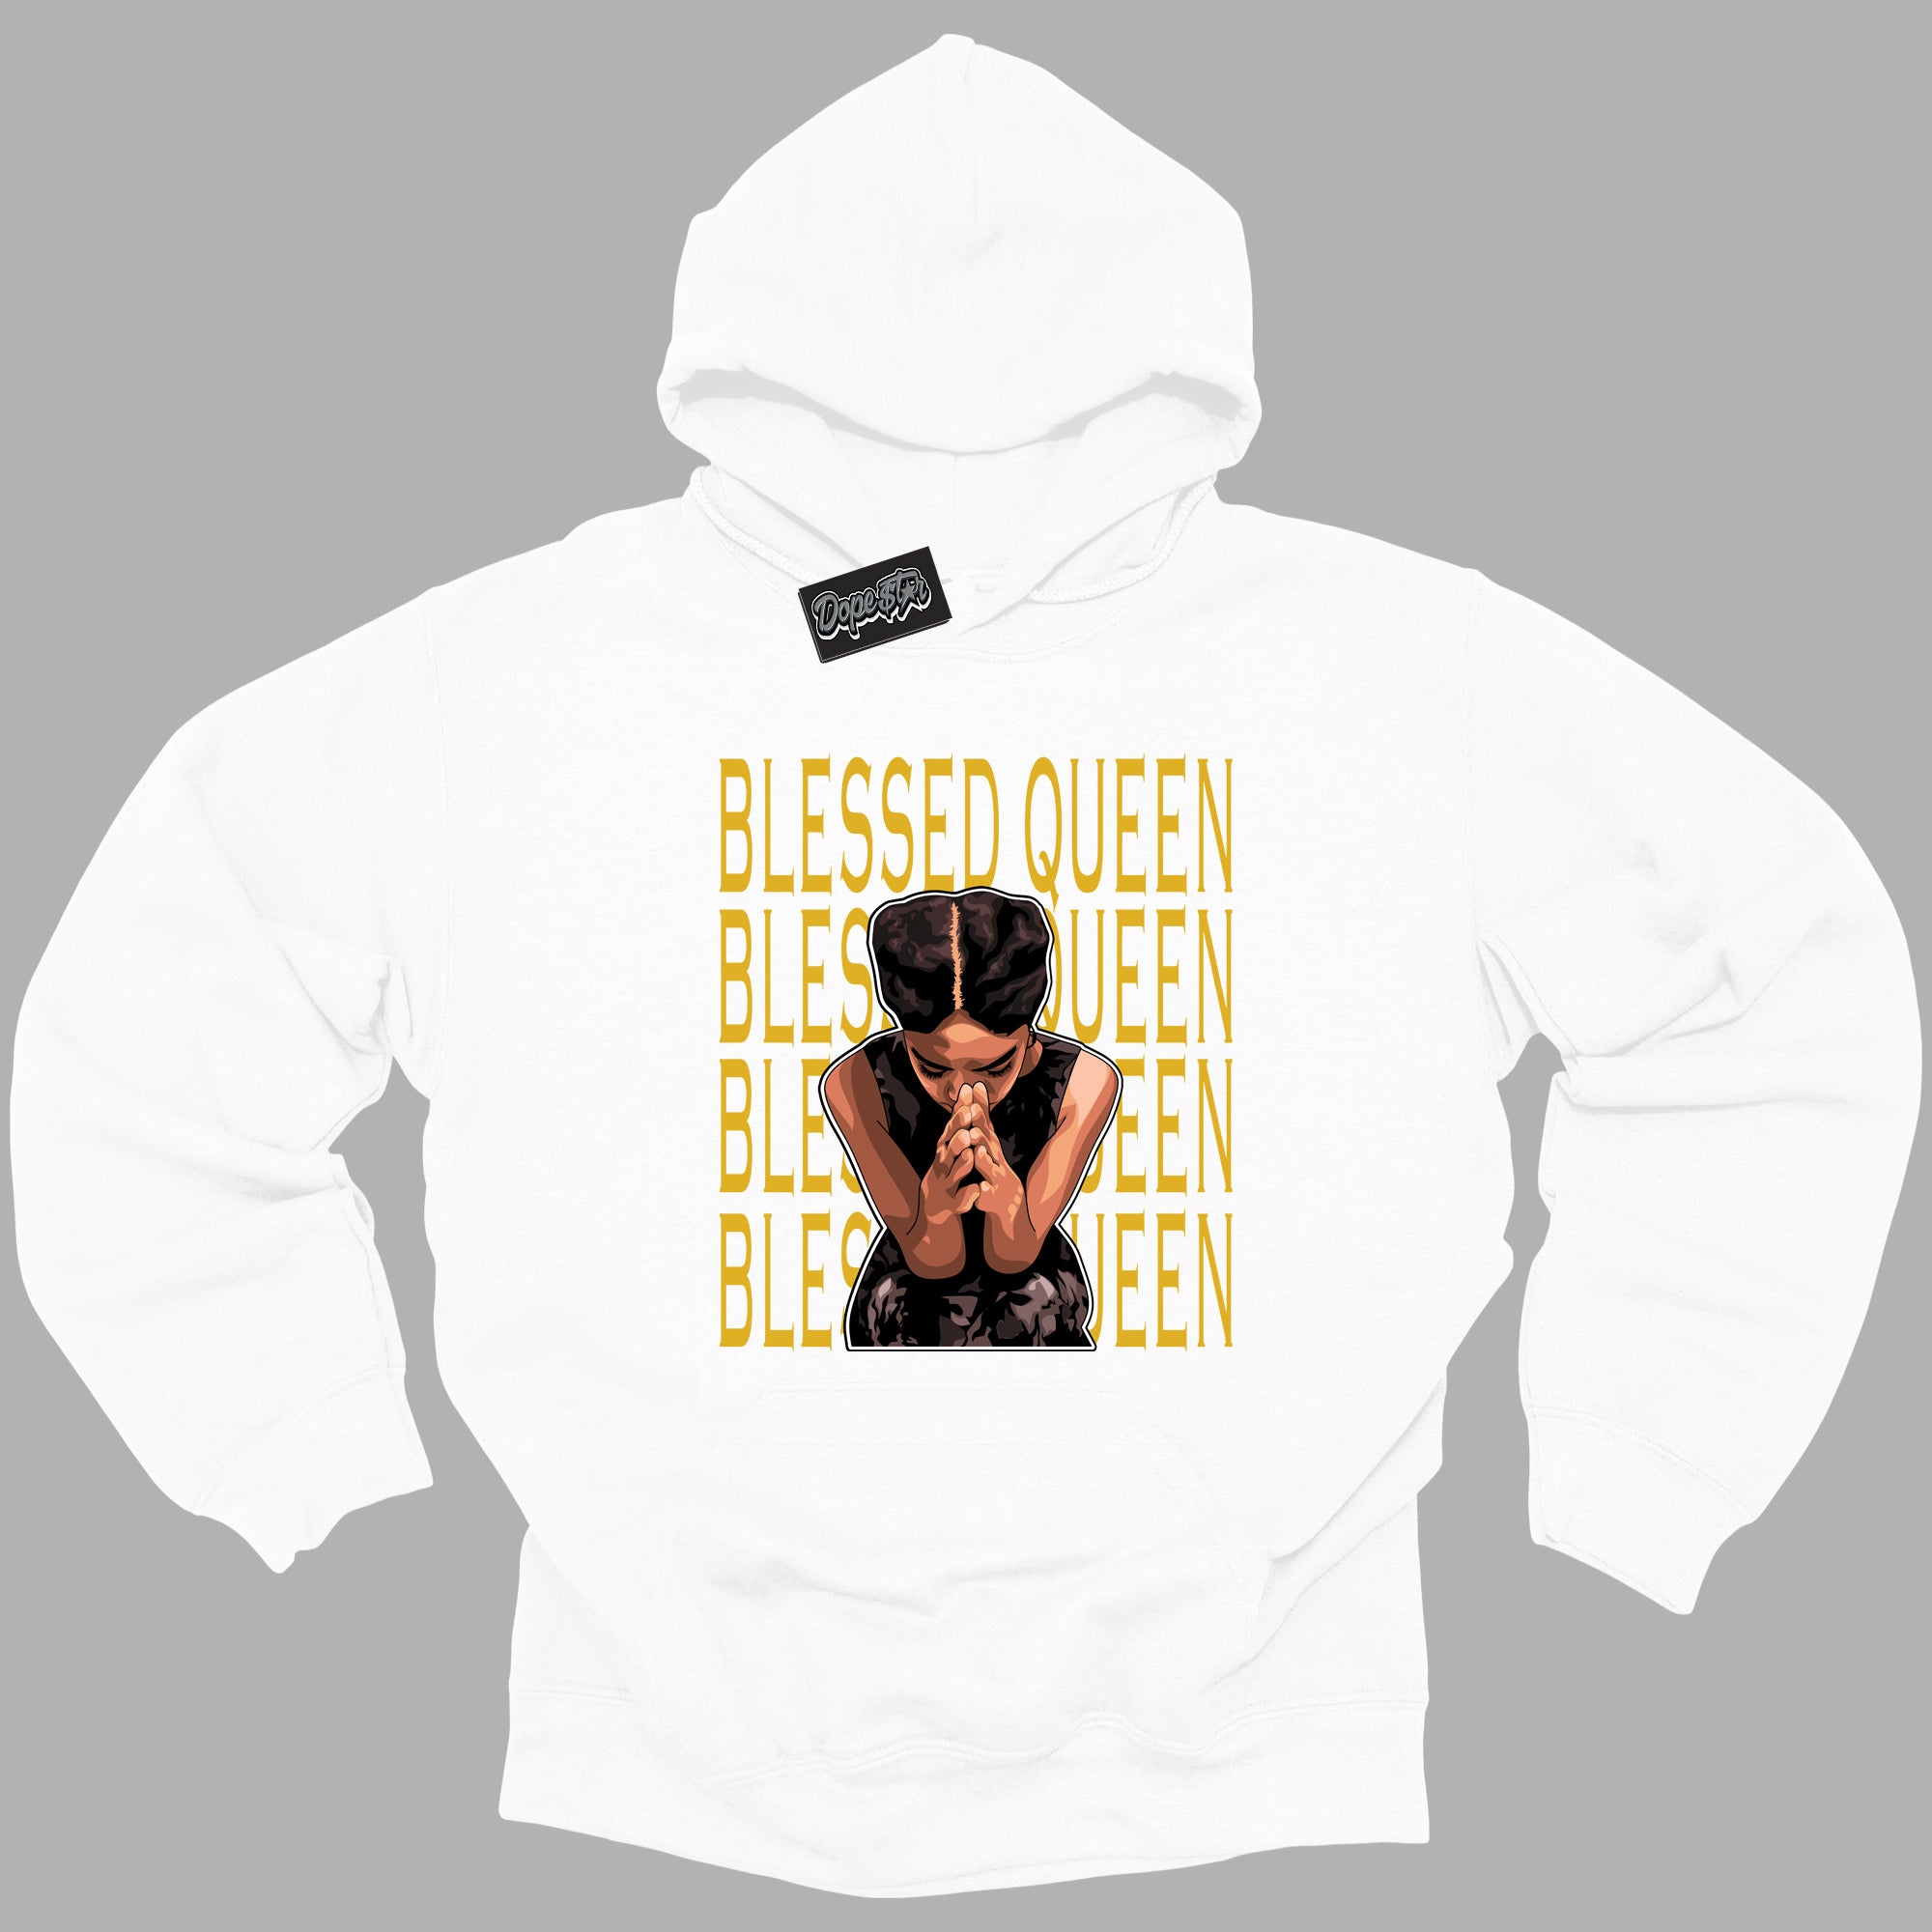 Cool White Hoodie with “ Blessed Queen ”  design that Perfectly Matches Yellow Ochre 6s Sneakers.